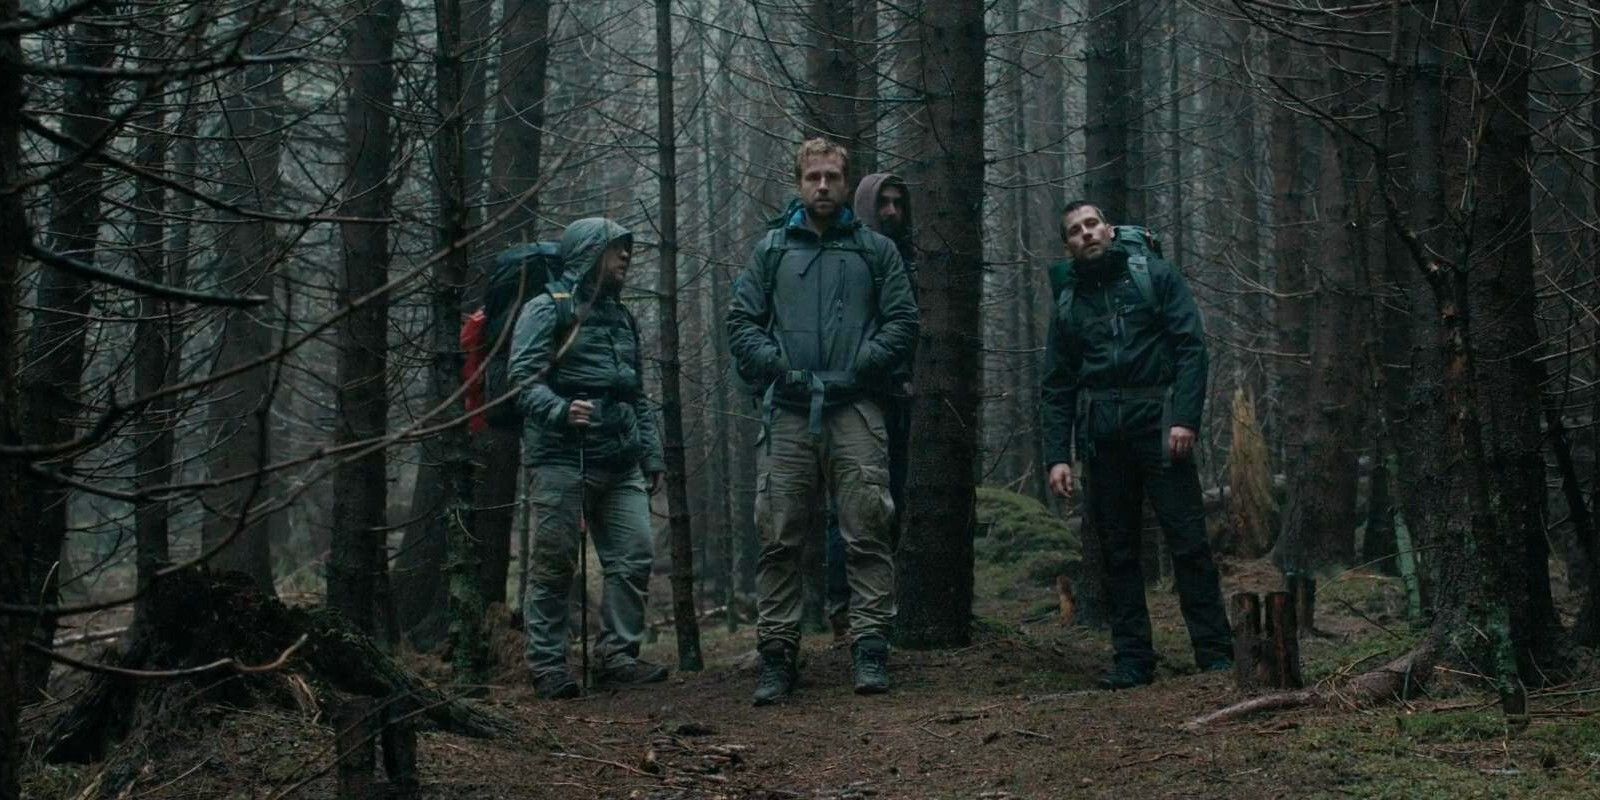 The protagonists deep in the woods in The Ritual